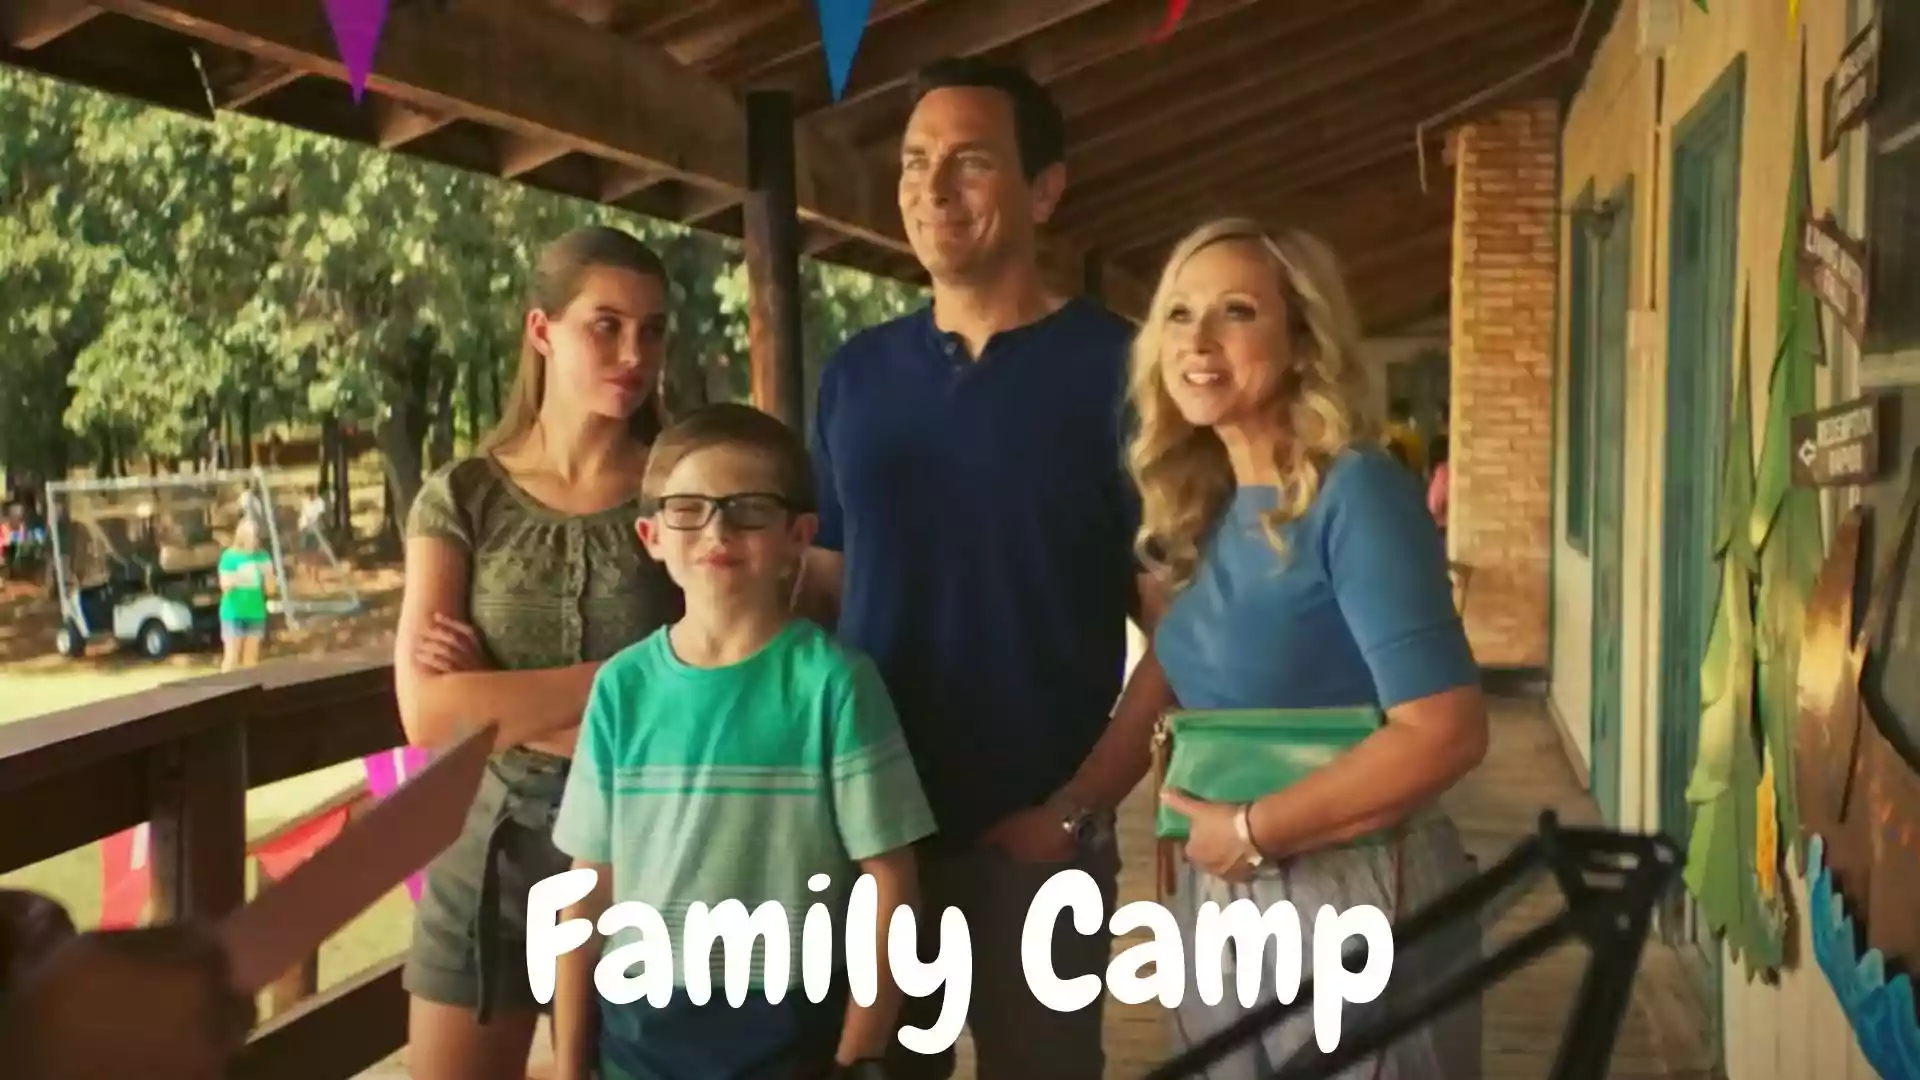 Family Camp Wallpaper and Images